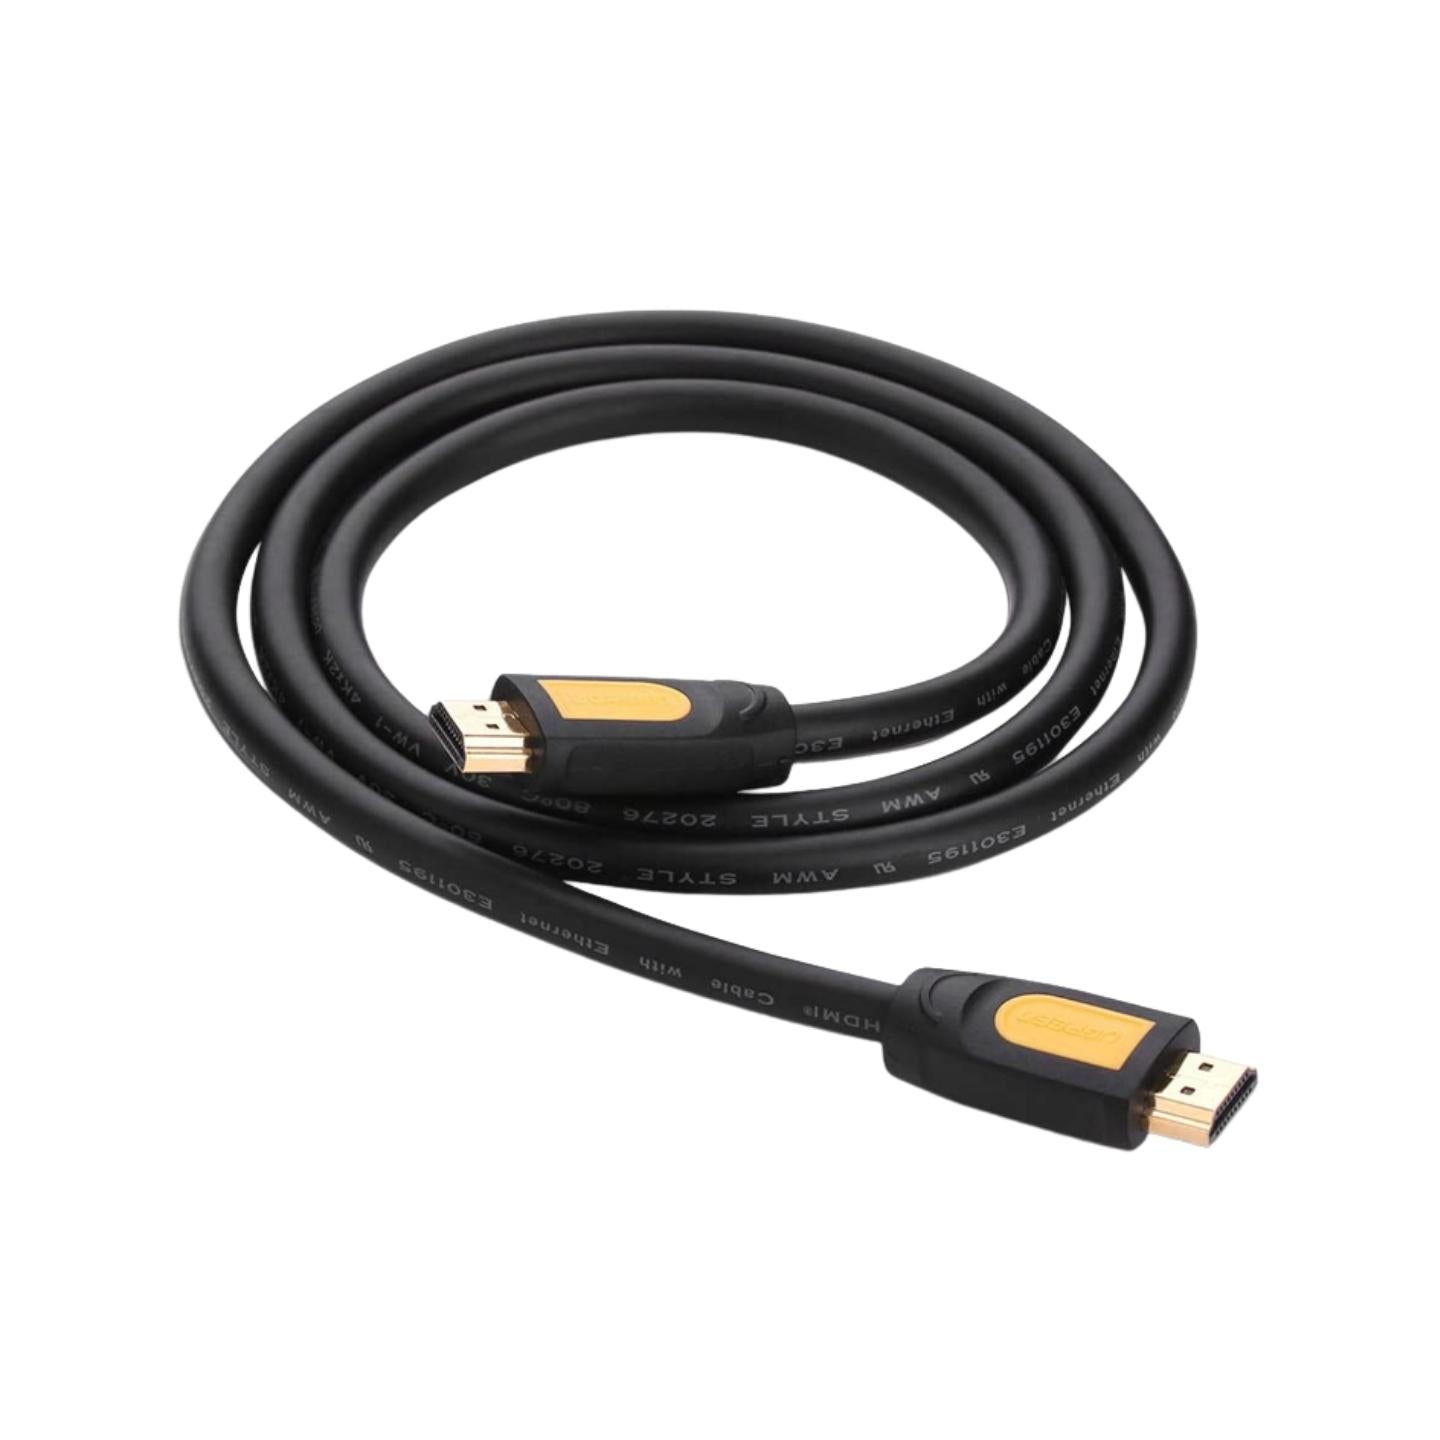 UGREEN HDMI 5M FULL COPPER CABLE